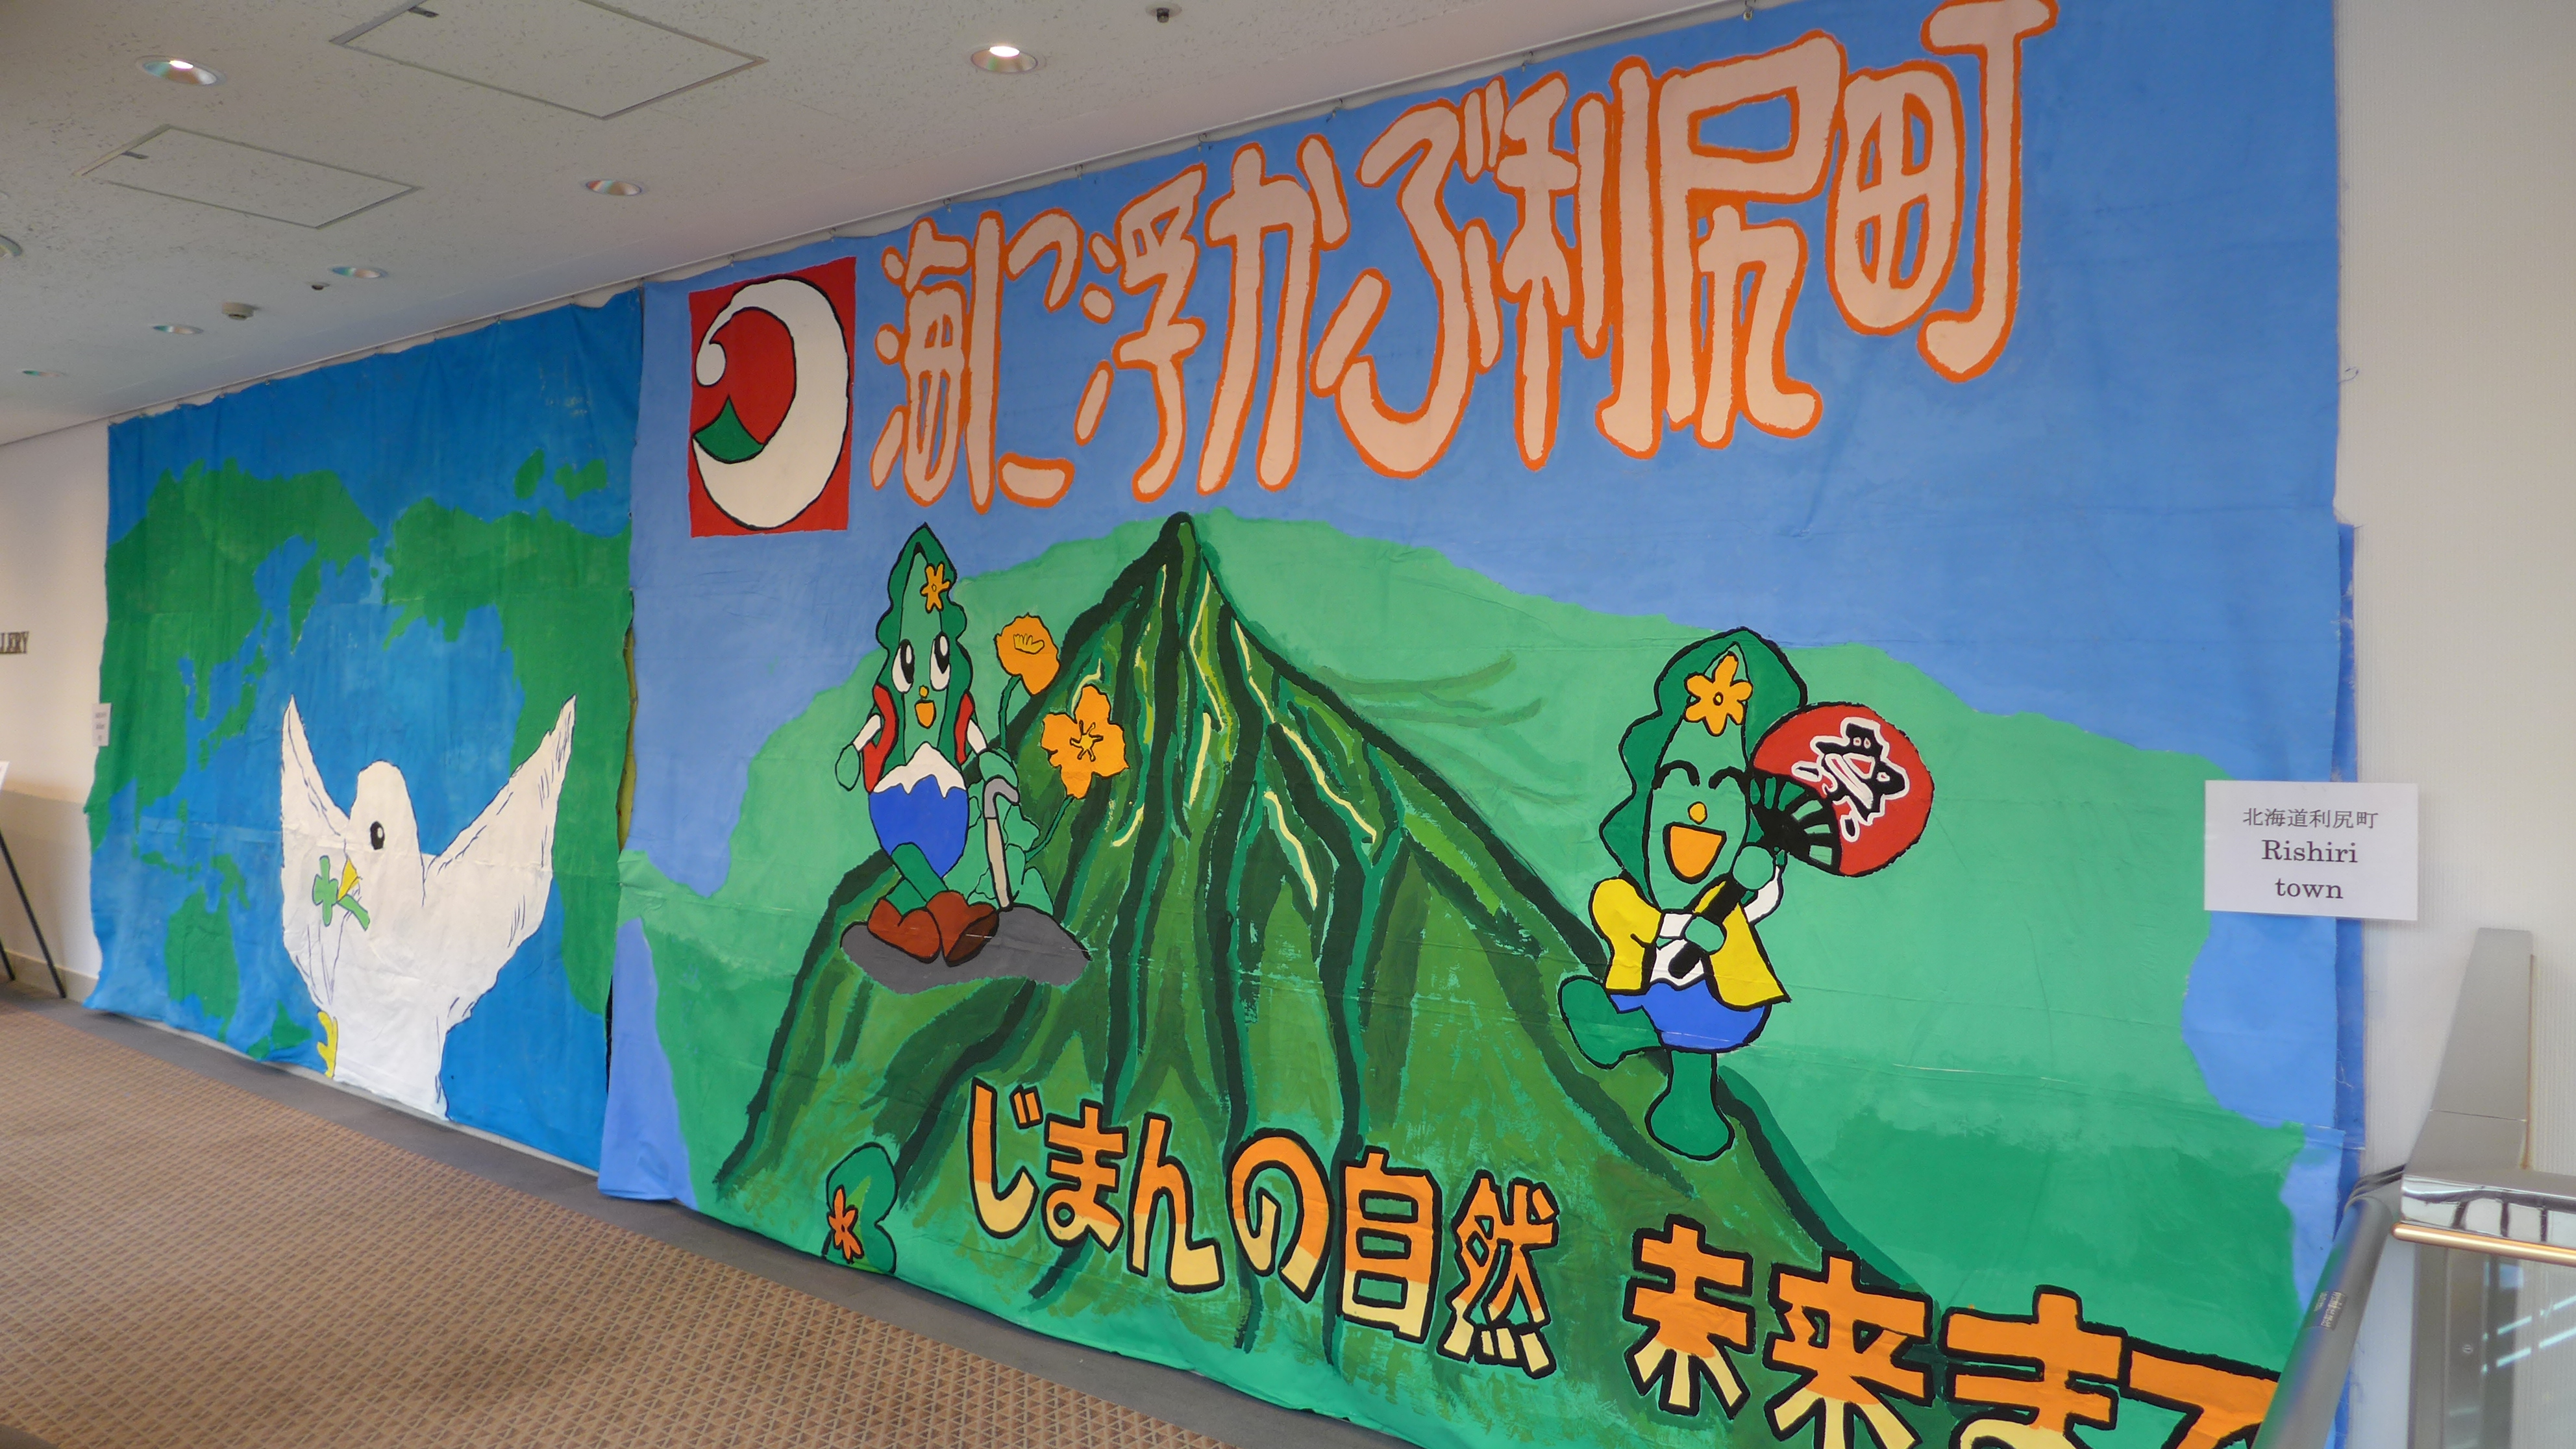 June 23 ~ July 31: The 5th Exhibition of the Biggest Painting in the World 2020 Haneda Airport, under the theme “Connect All the Towns in Japan, Connect All the Countries in the World”, was held 